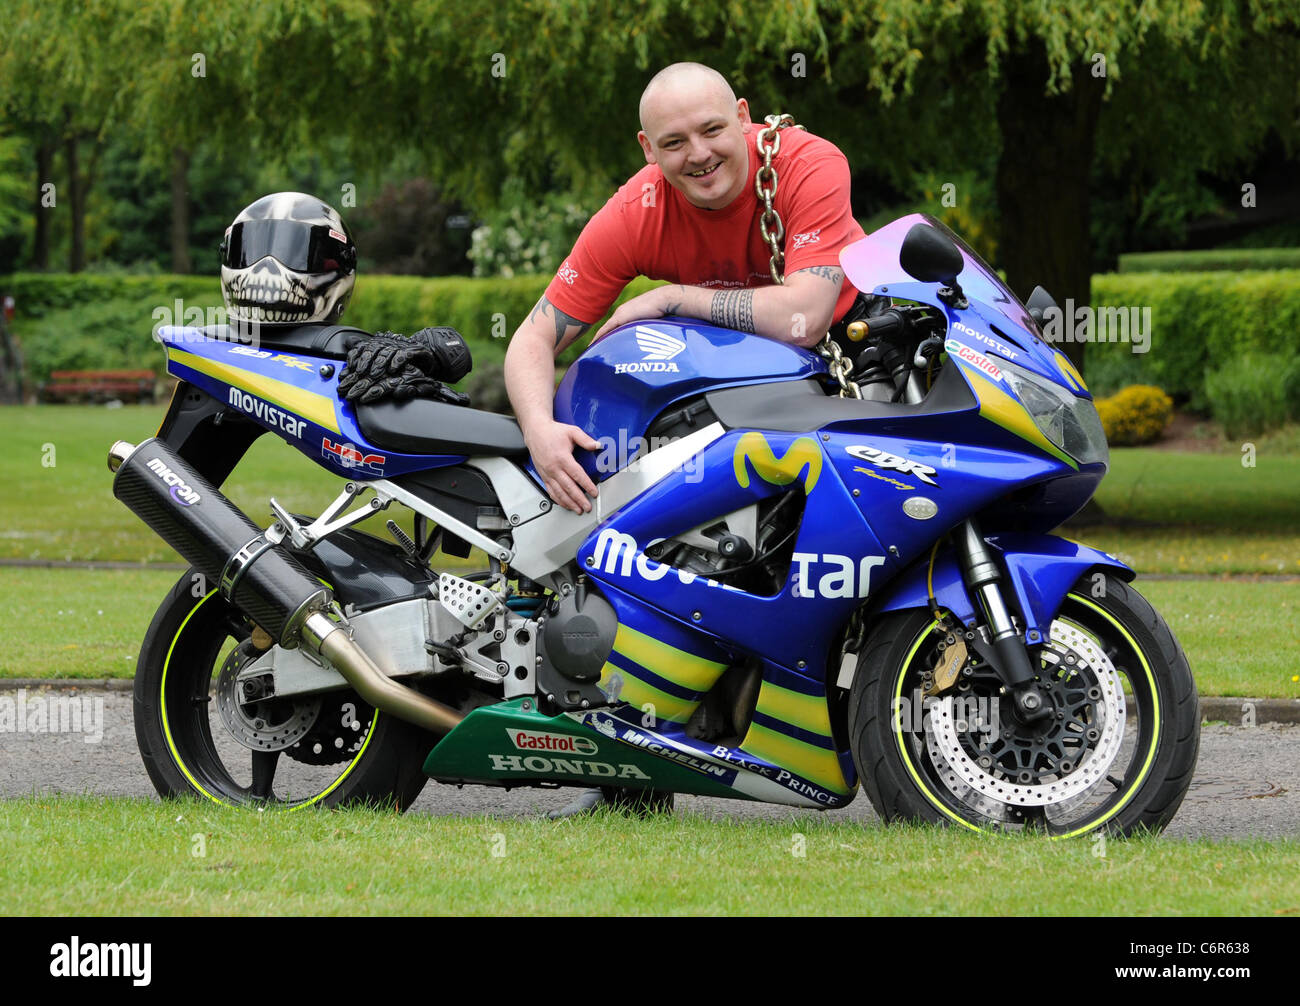 Dave Smith from Wolverhampton has been crowned 'Britain's biggest bike lover' and proved his passion riding over 100,000 miles Stock Photo